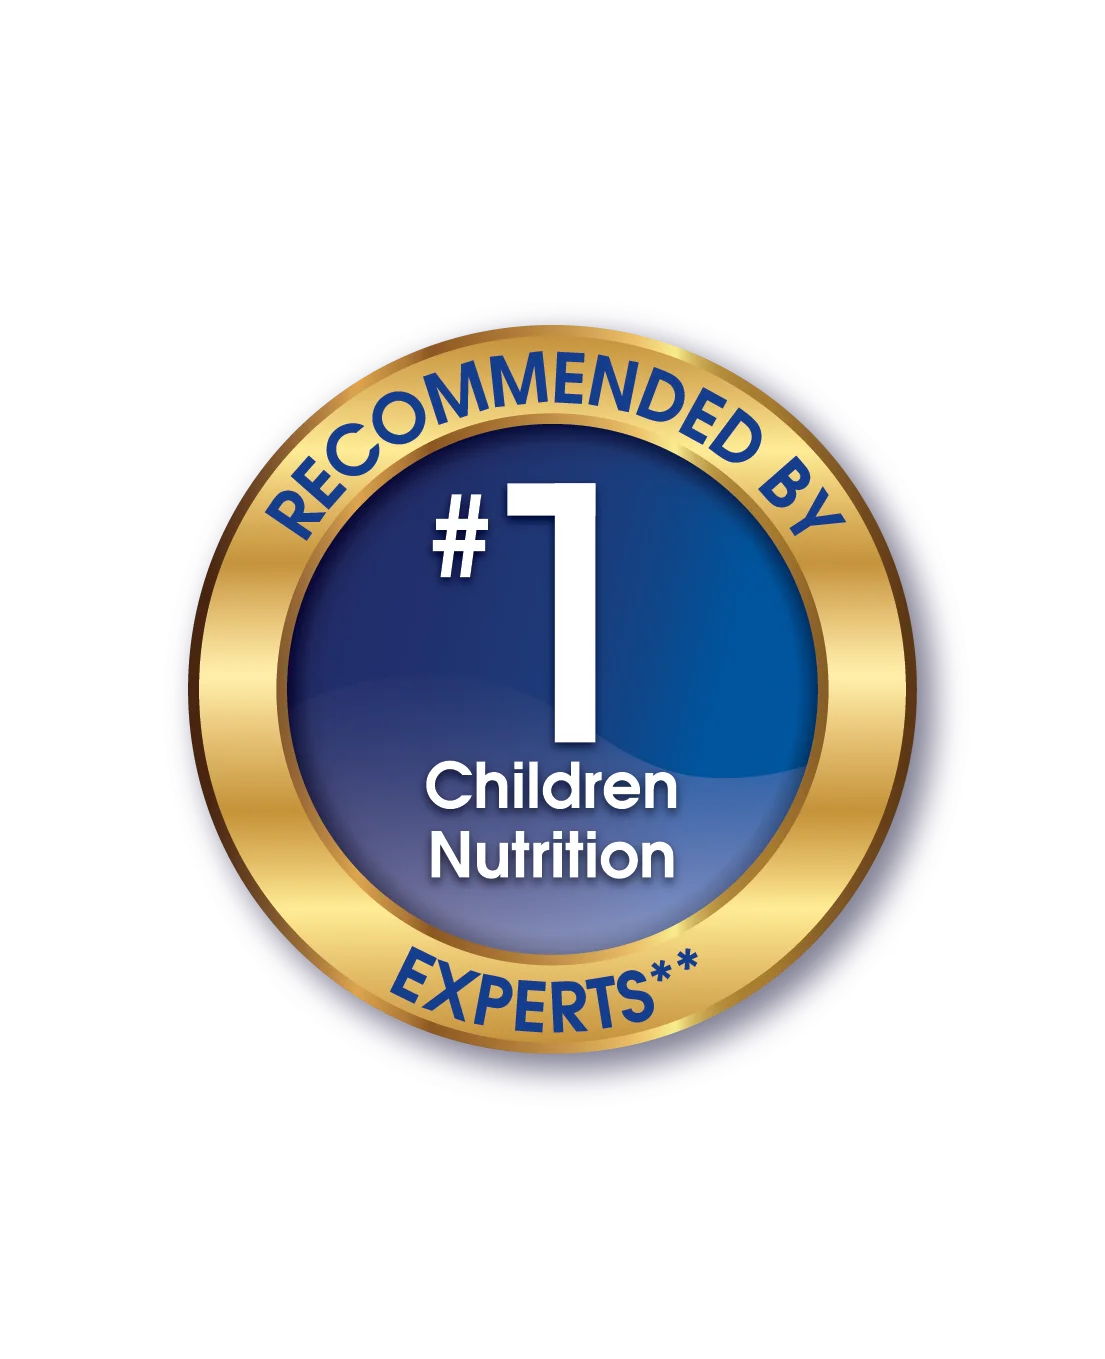 recommended by #1 children nutrition experts